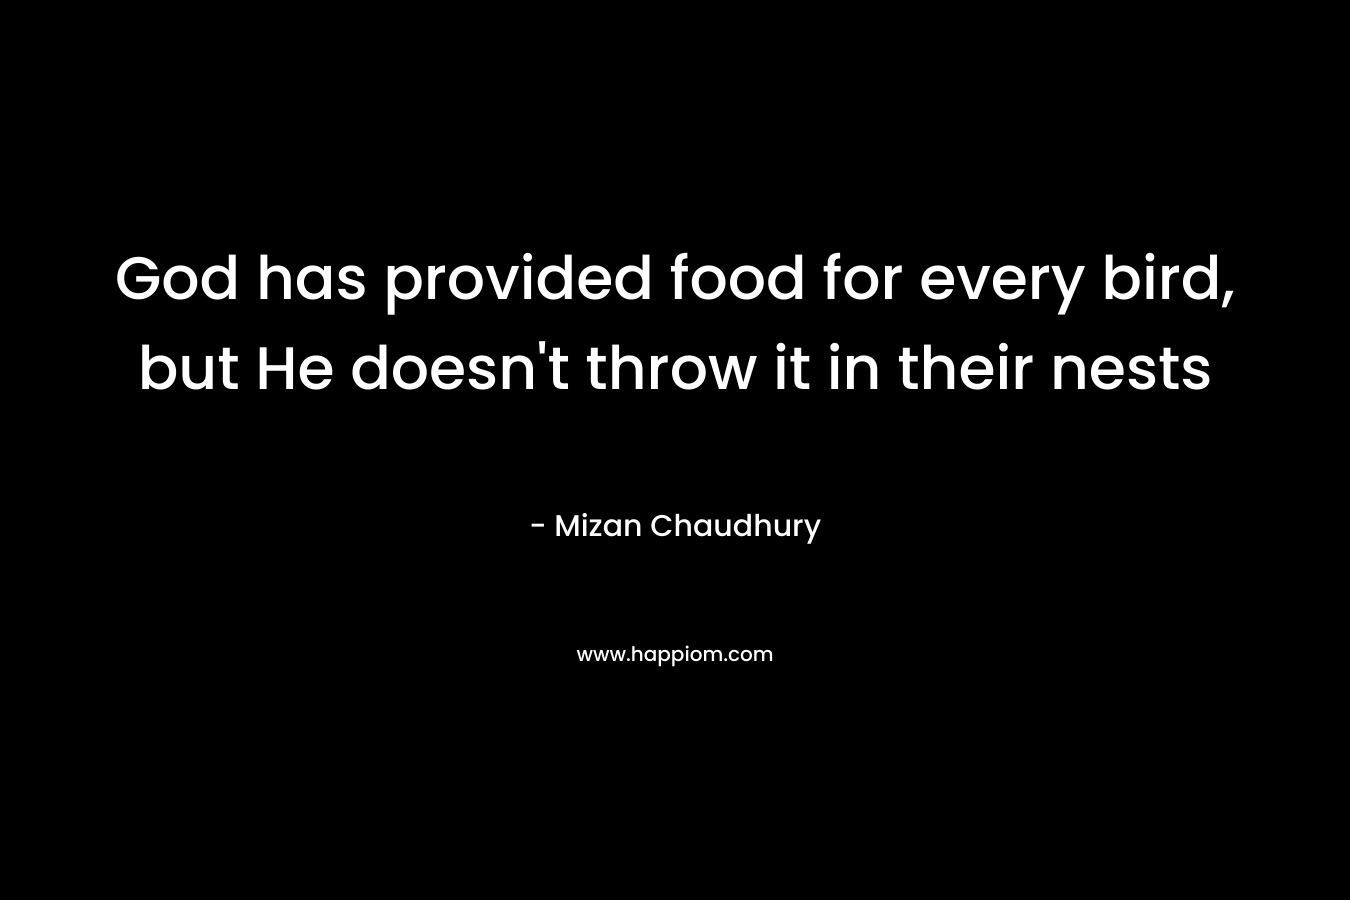 God has provided food for every bird, but He doesn’t throw it in their nests – Mizan Chaudhury